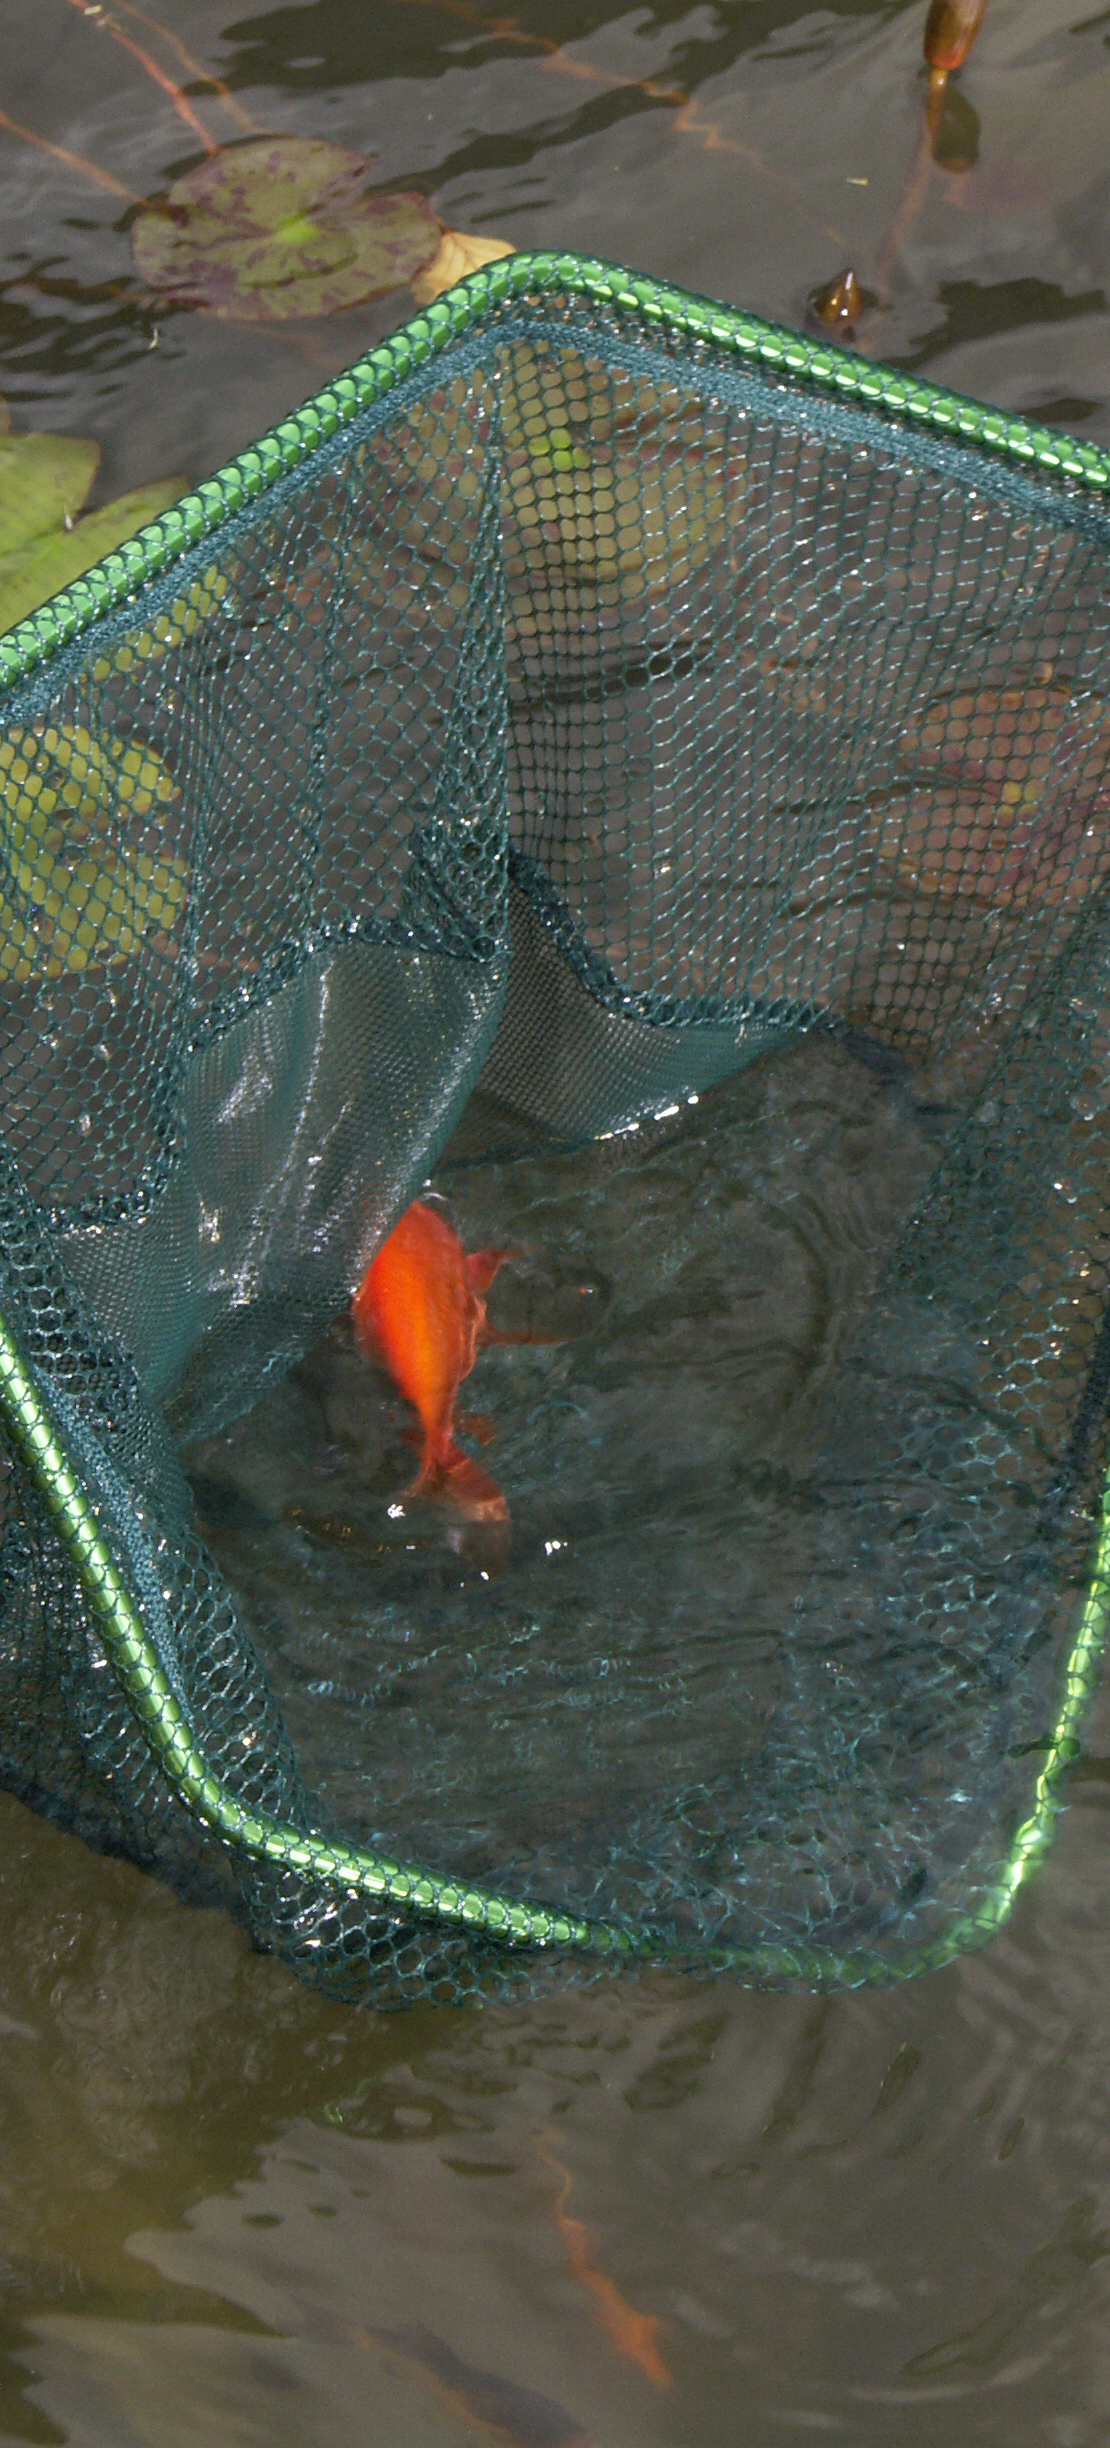 A green pond net removing a dead goldfish from a pond